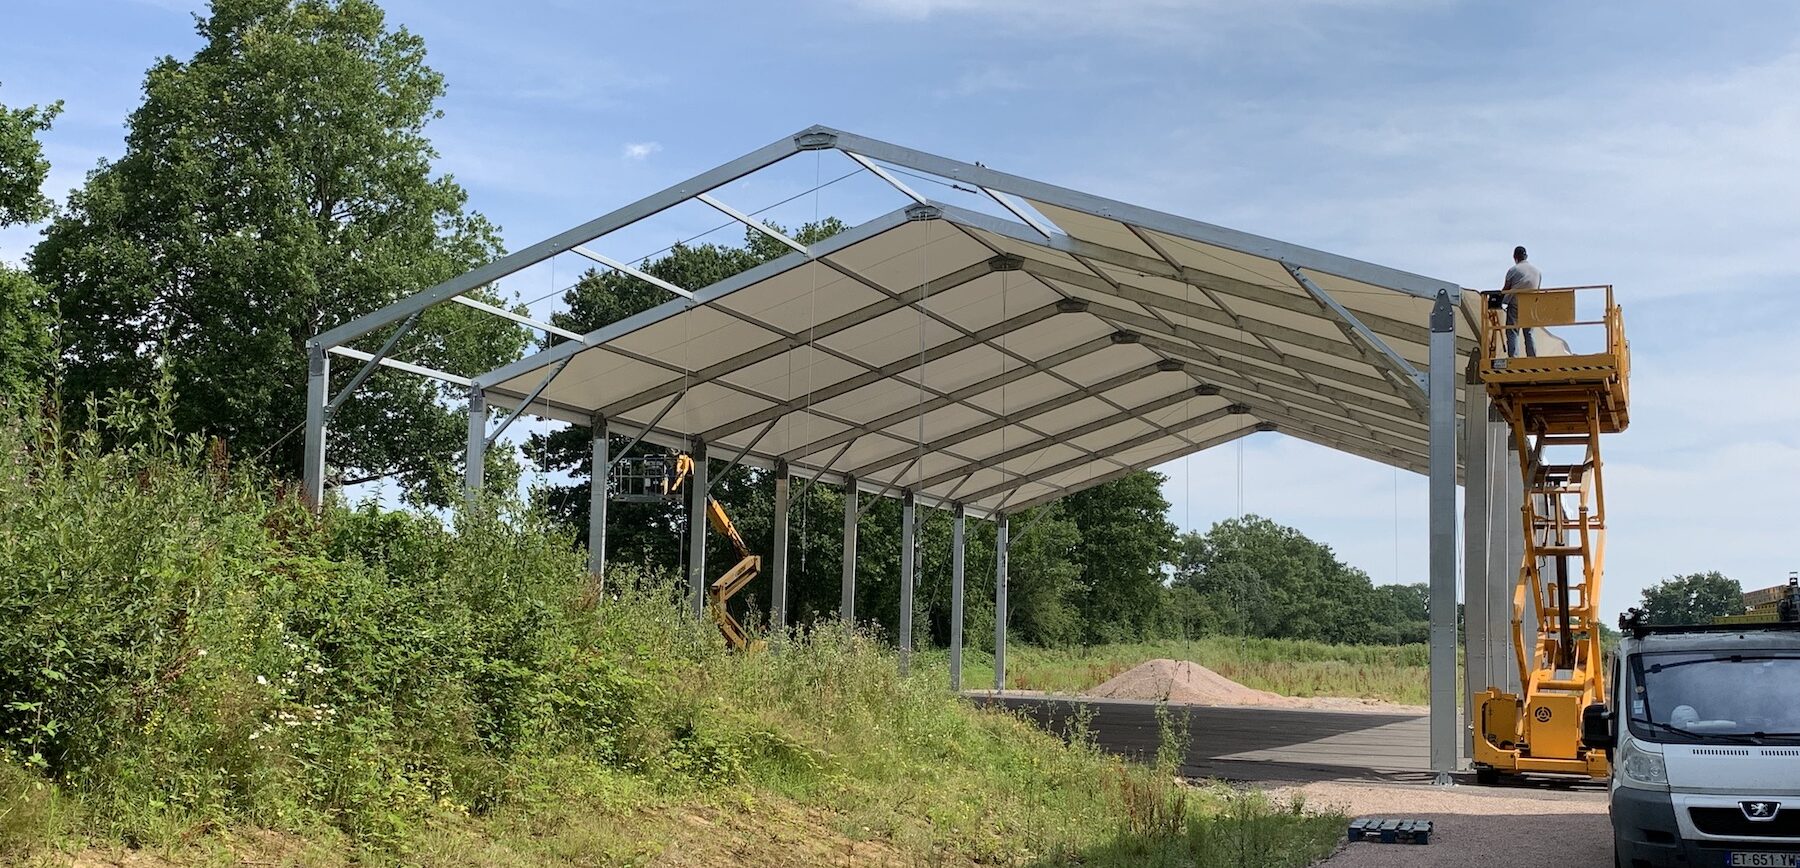 Lauralu temporary canopy for protecting stock in agriculture